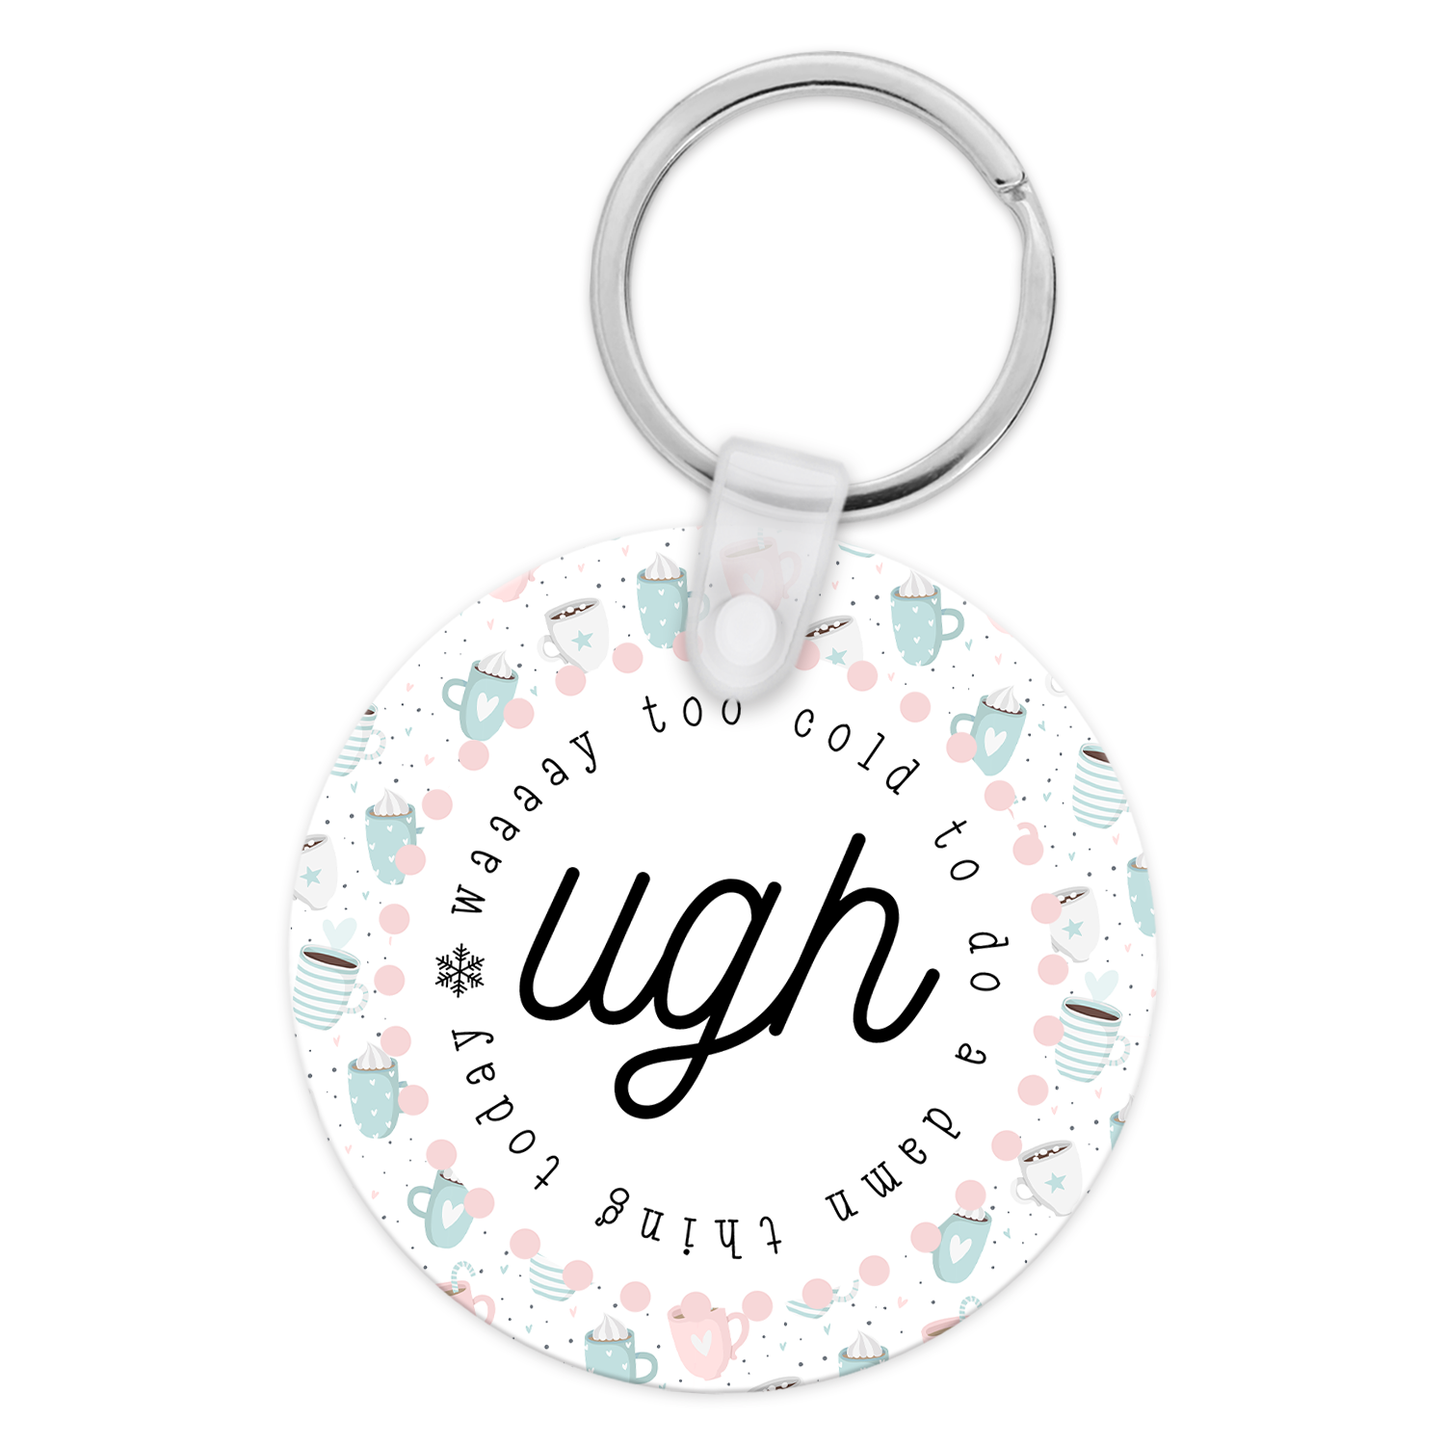 Ugh, Way Too Cold To Do A Damn Thing Today Keychain